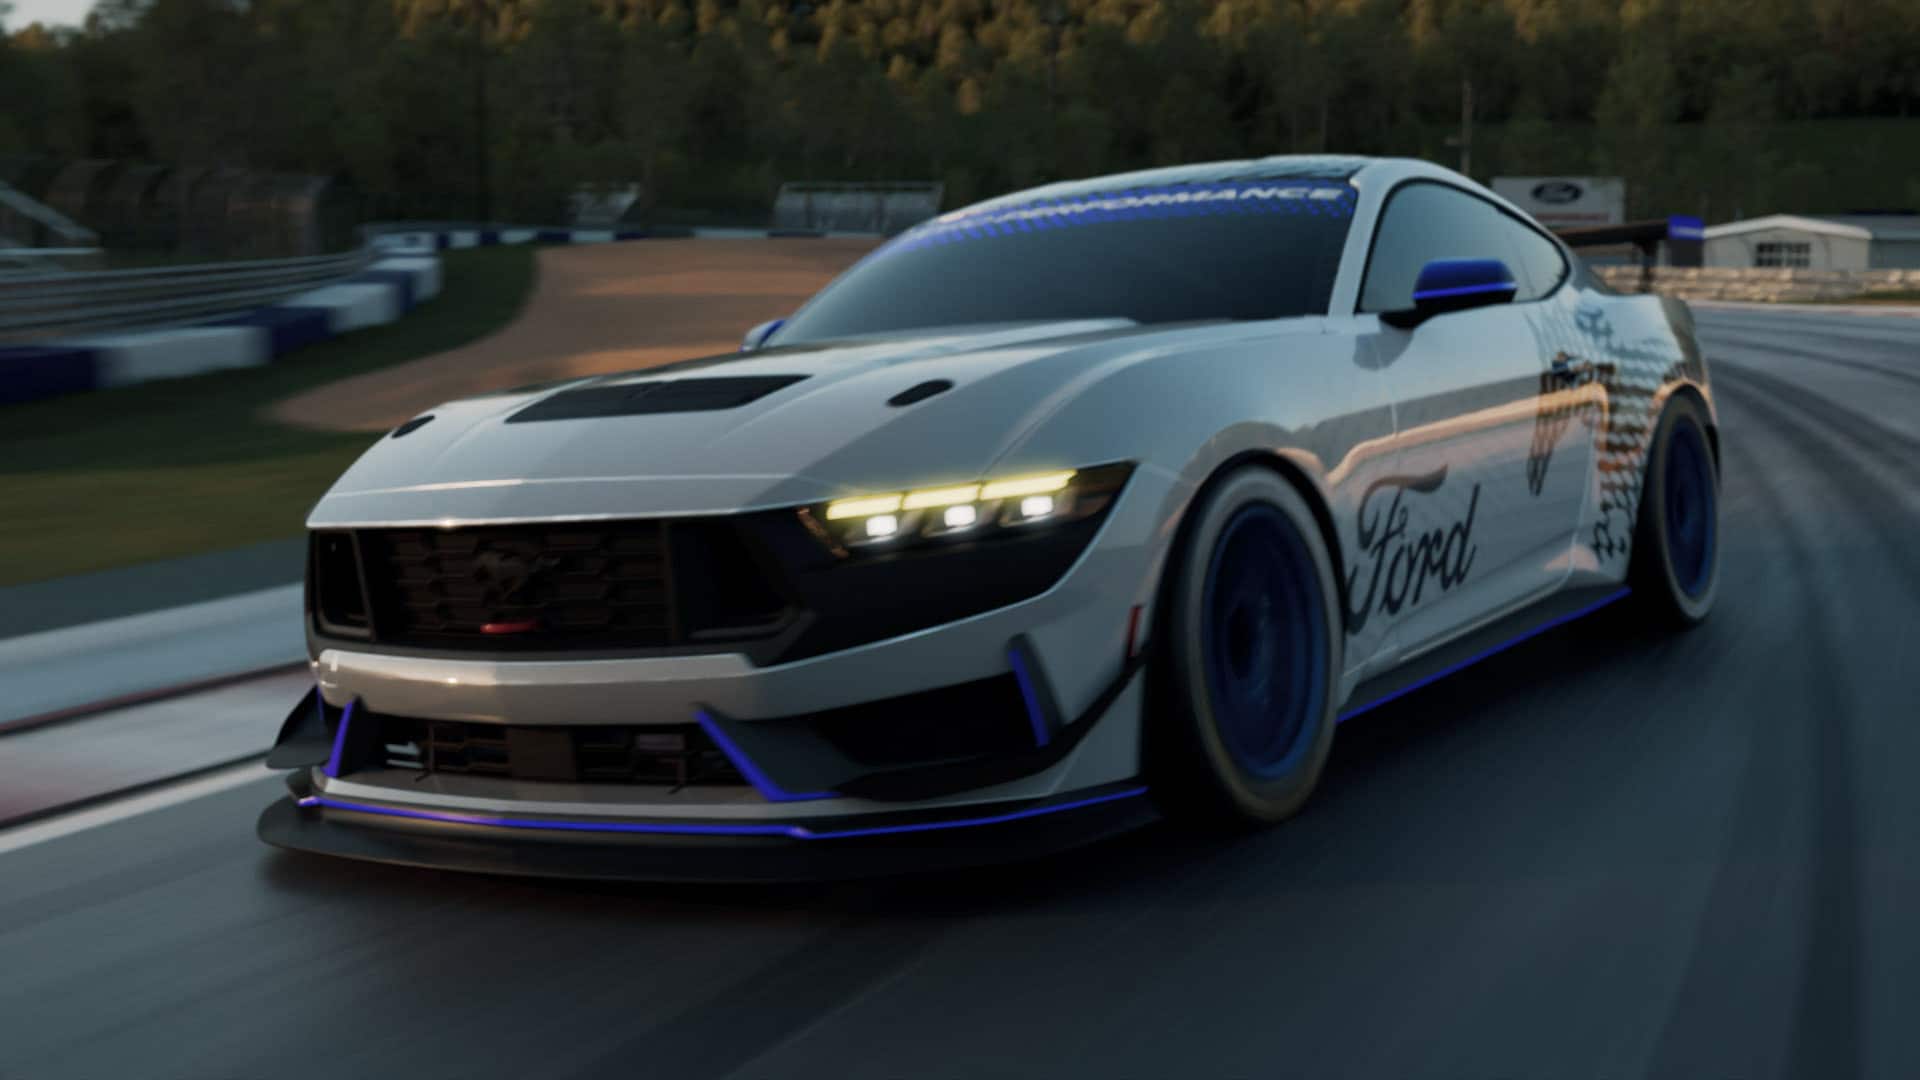 Mustang Gt4 on track